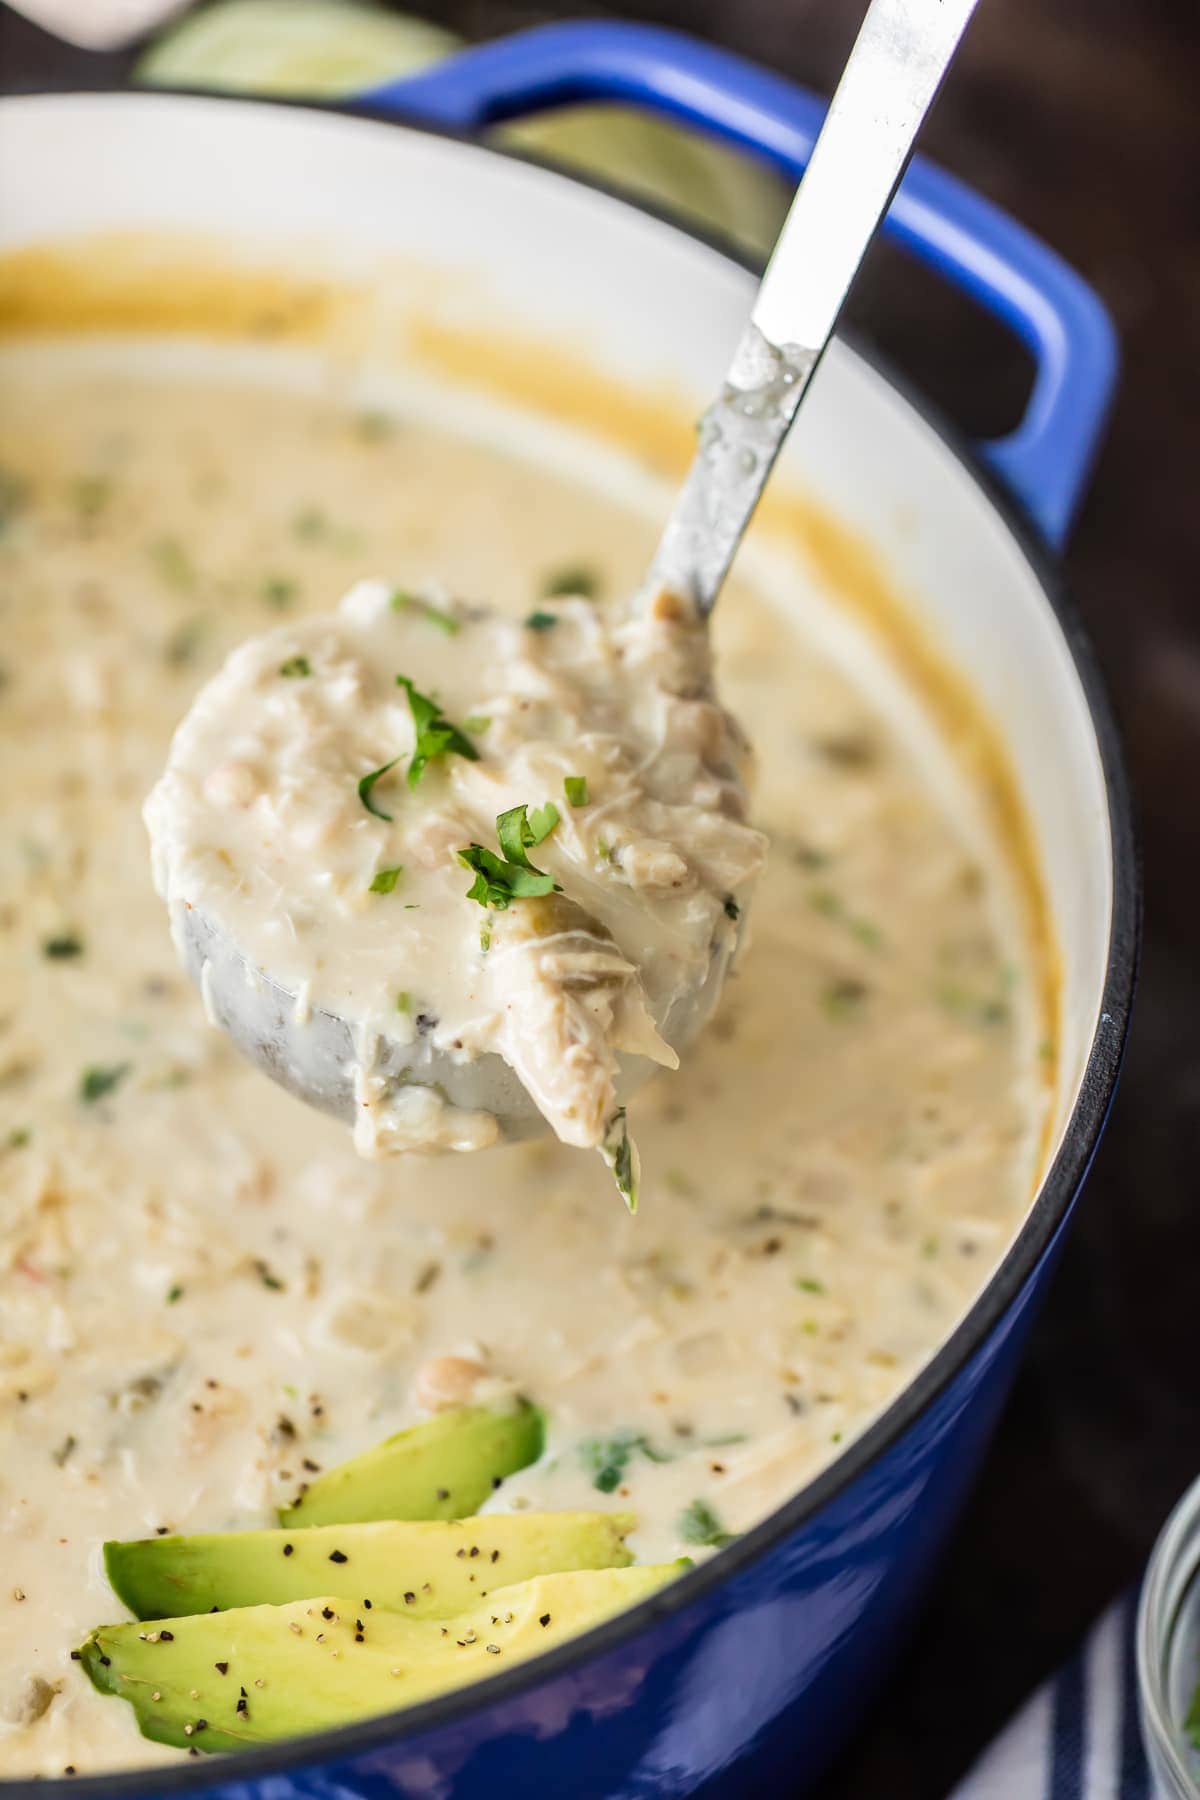 CREAMY WHITE CHICKEN CHILI made with CREAM CHEESE is the ultimate comfort food! Made in minutes and feeds up to 16 people! Freeze some for a delicious meal later. THE BEST WHITE CHICKEN CHILI EVER!